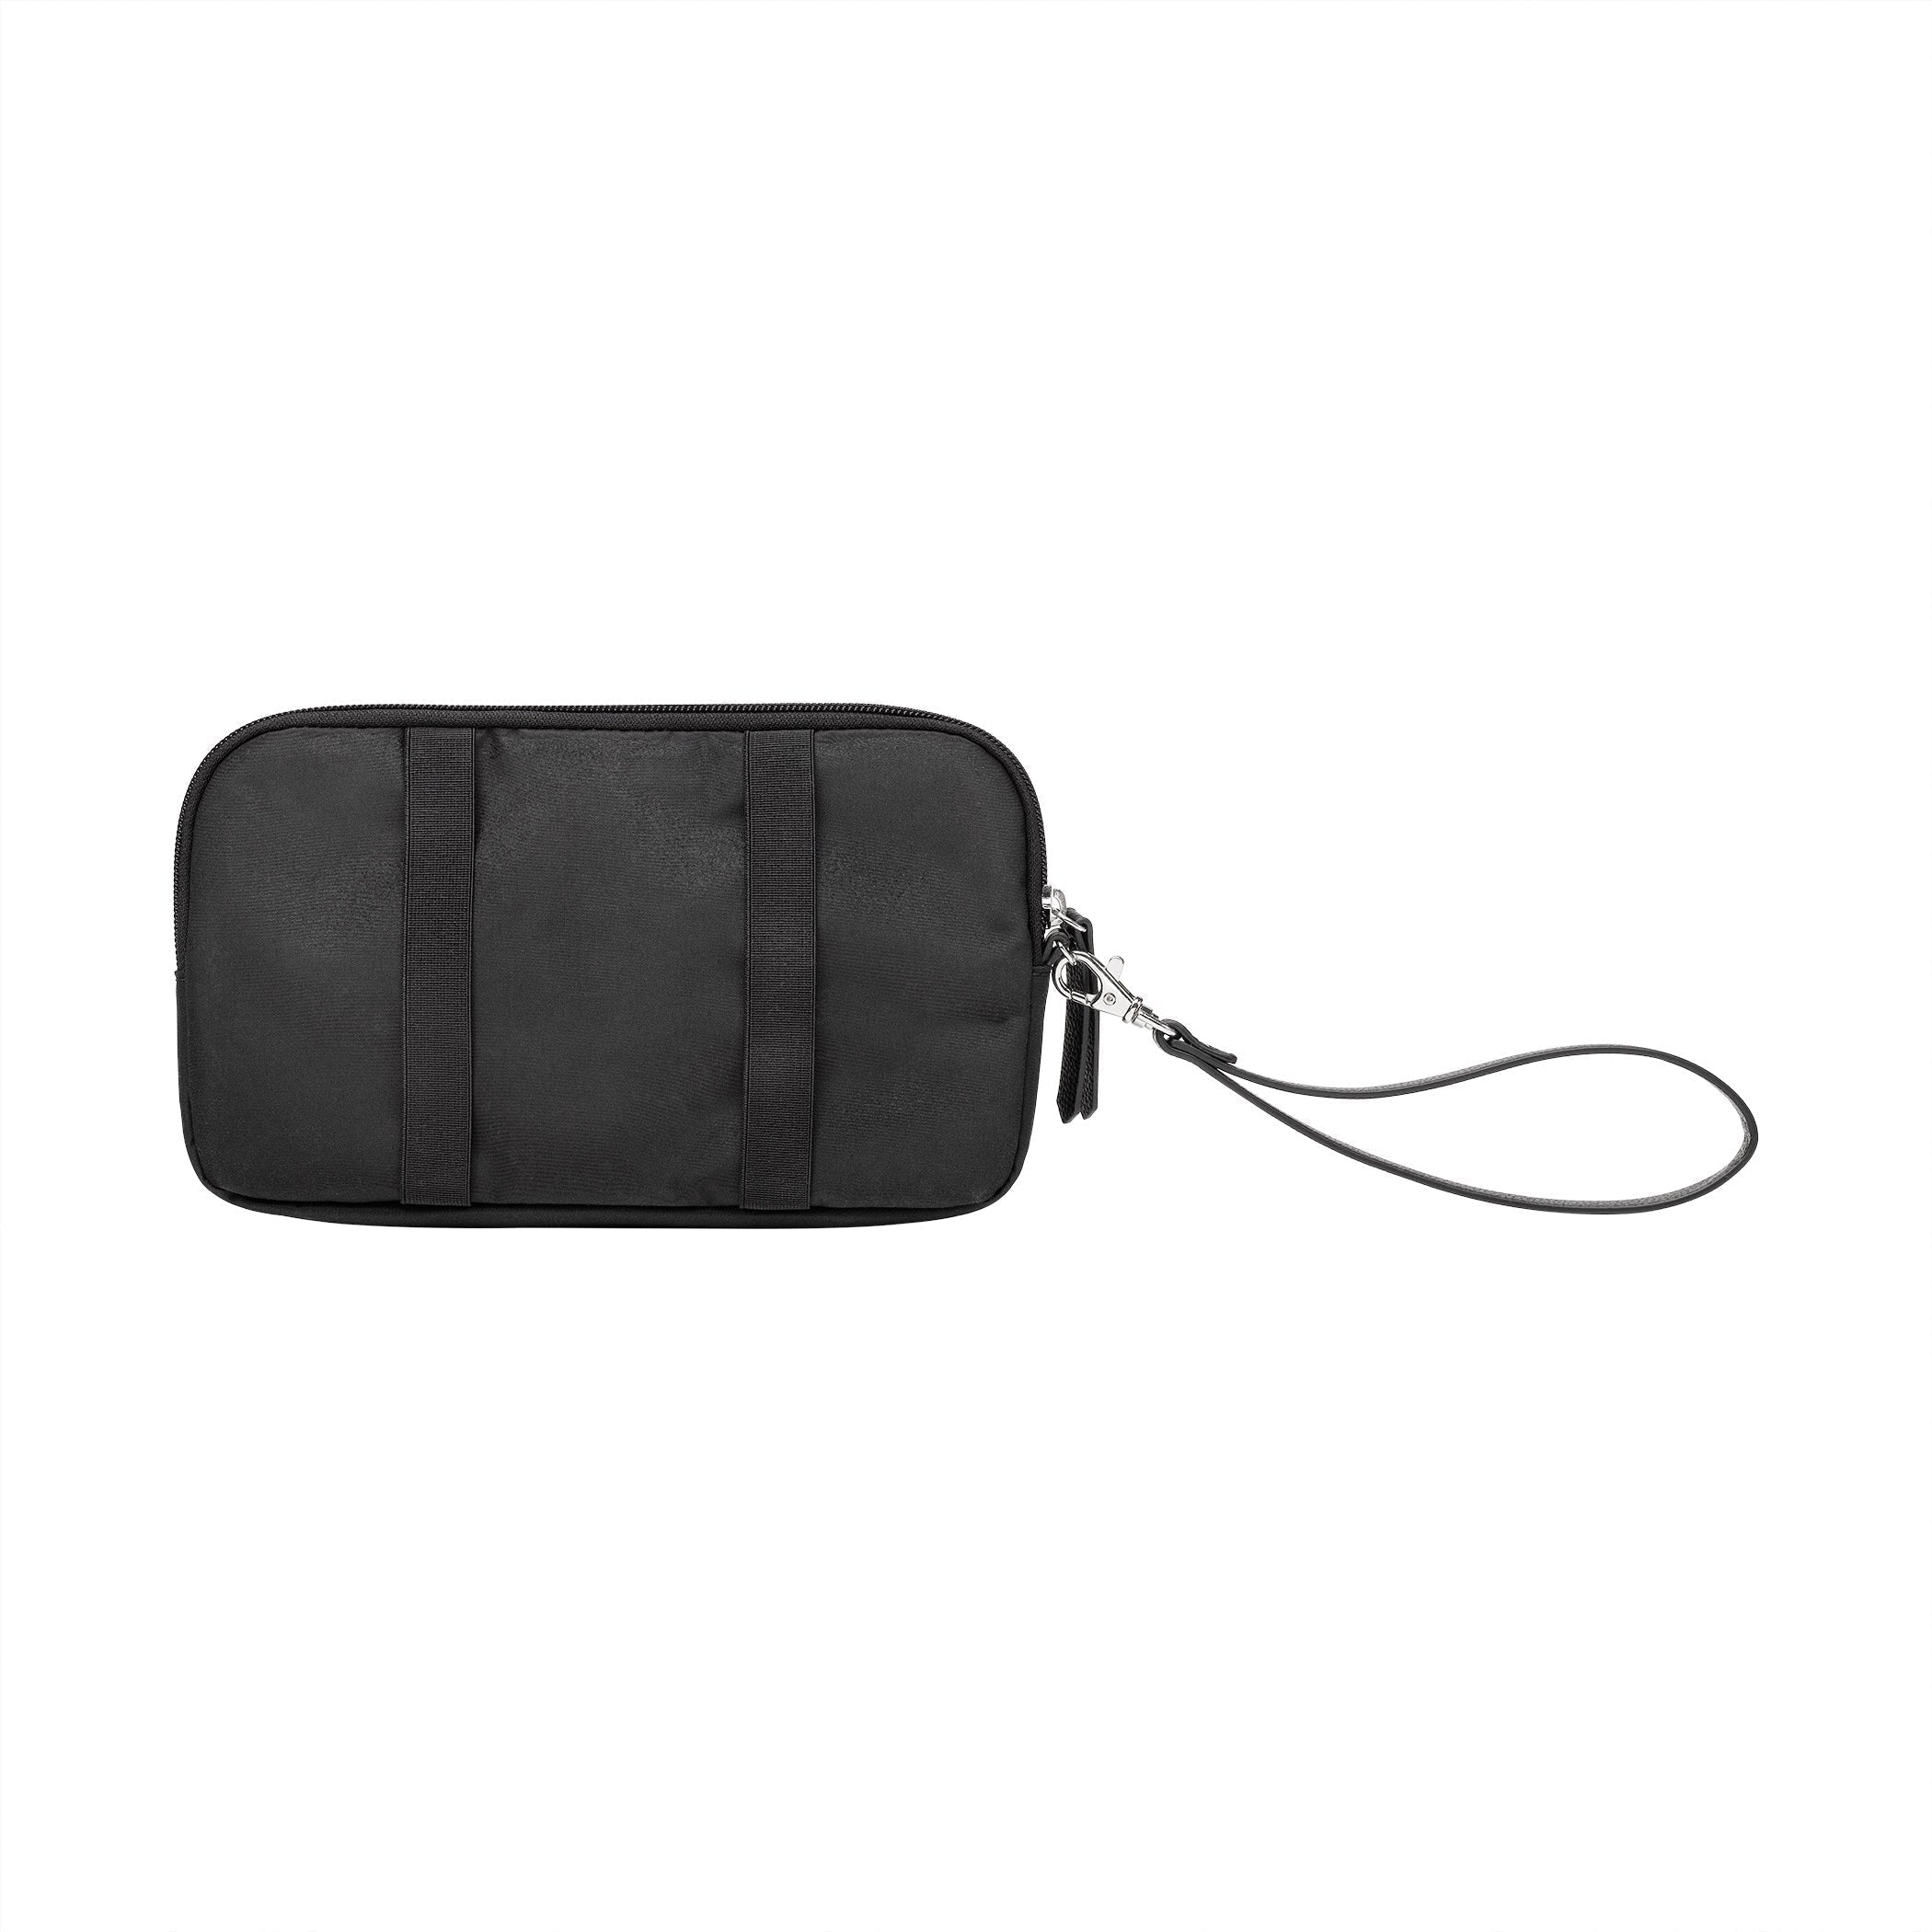 Petunia Pickle Bottom At-the-Ready Wristlet in Black Wipes Case